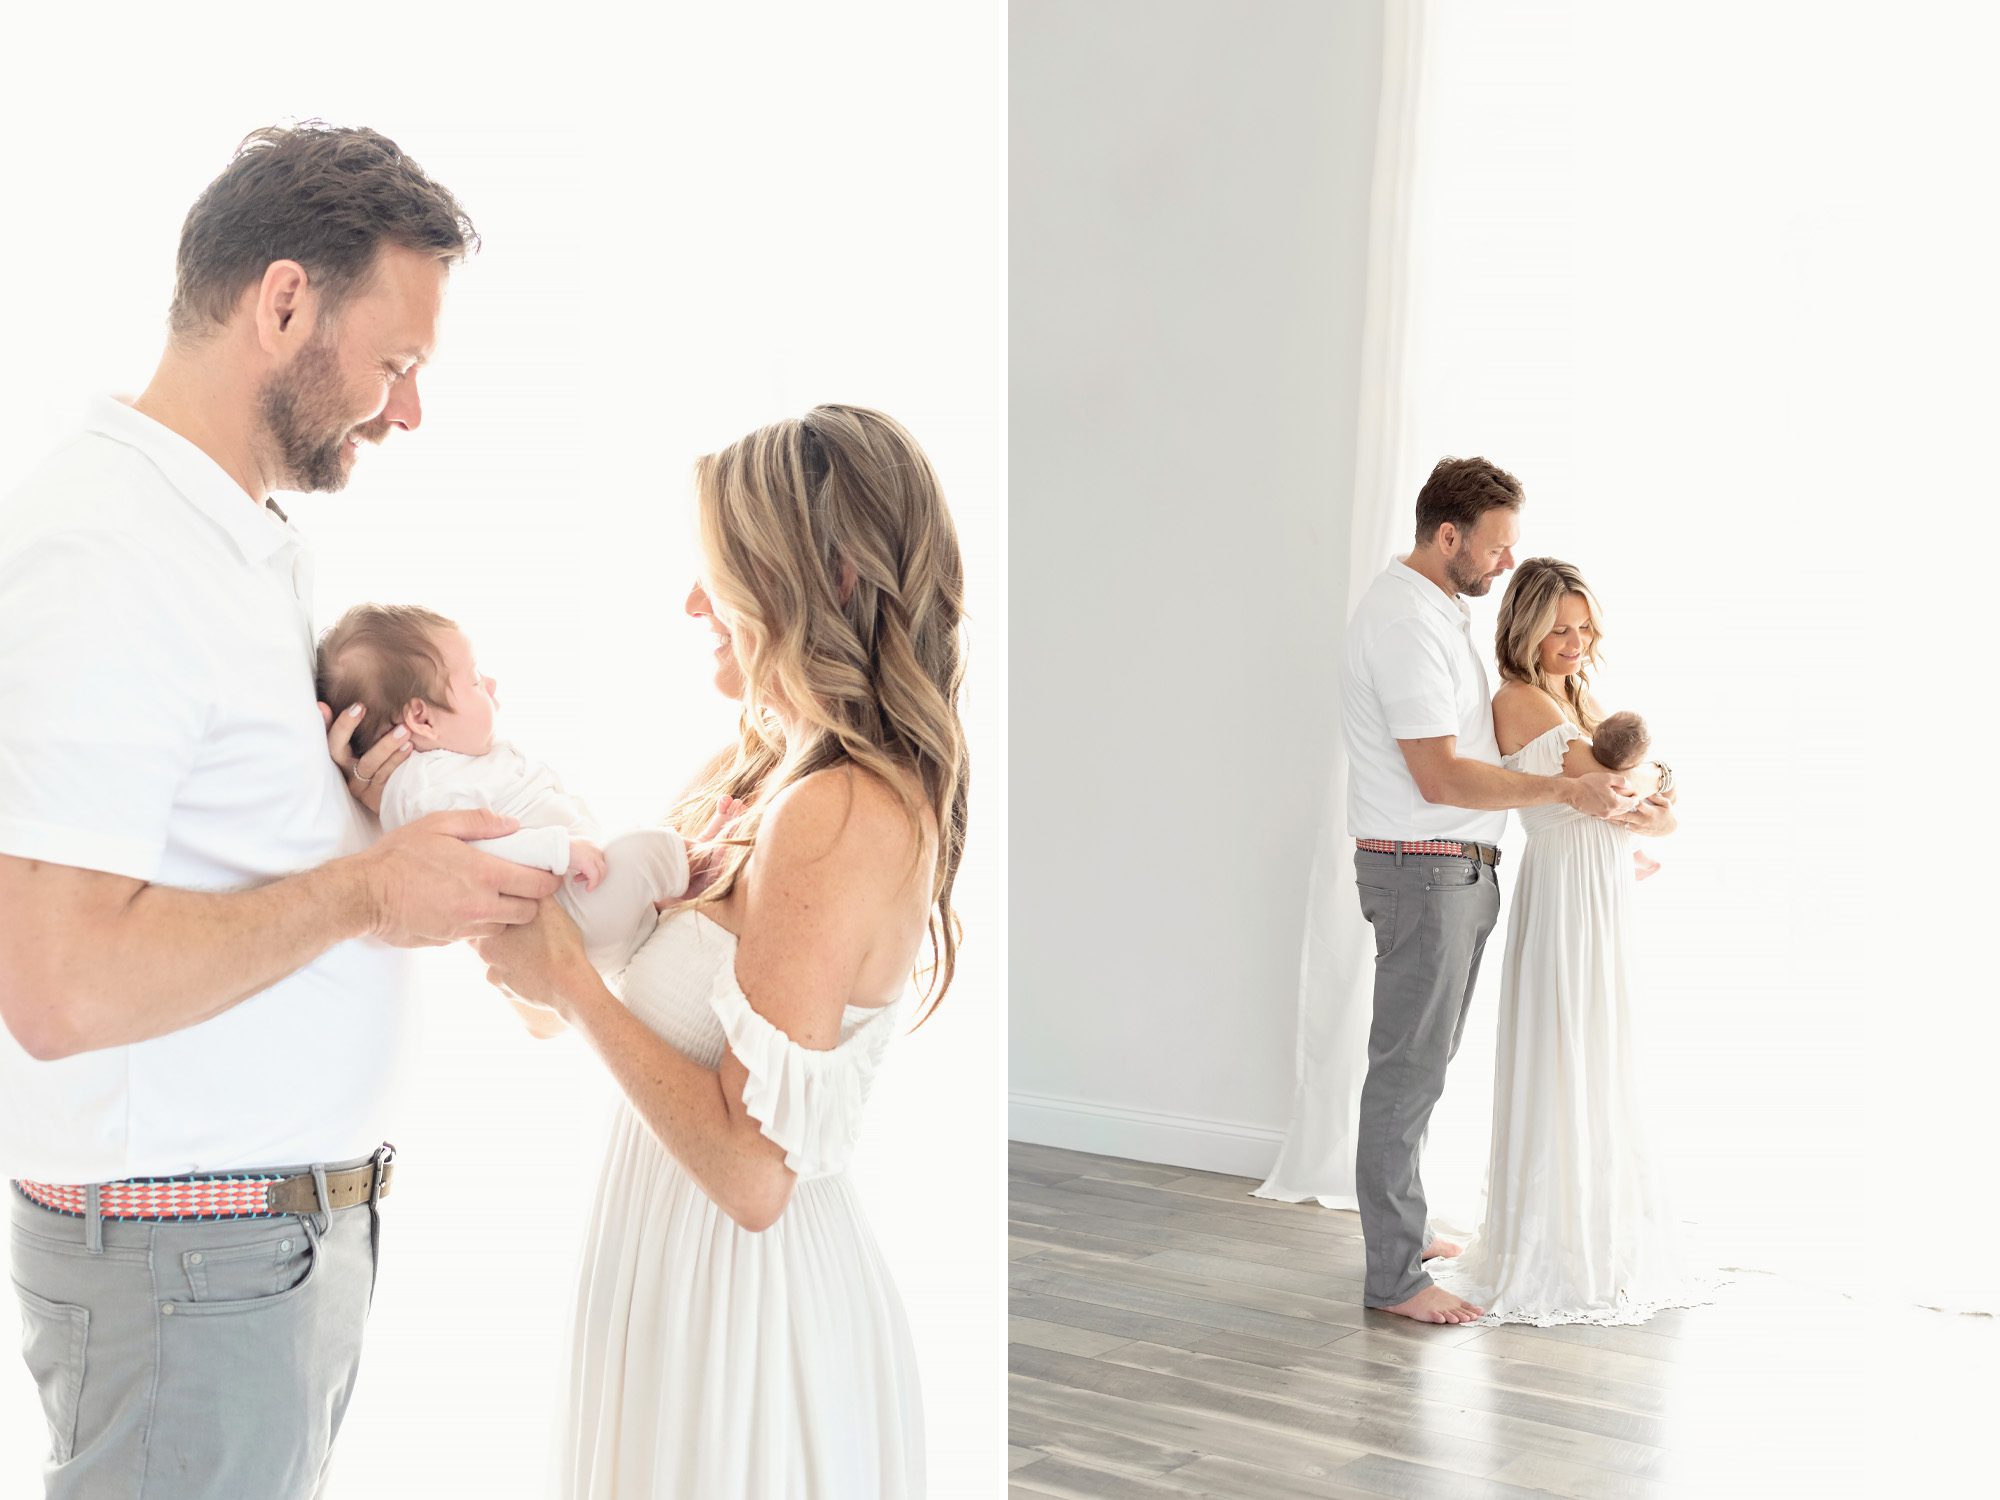 New family of 3 gets newborn portraits done in bright white studio space in Tampa, FL